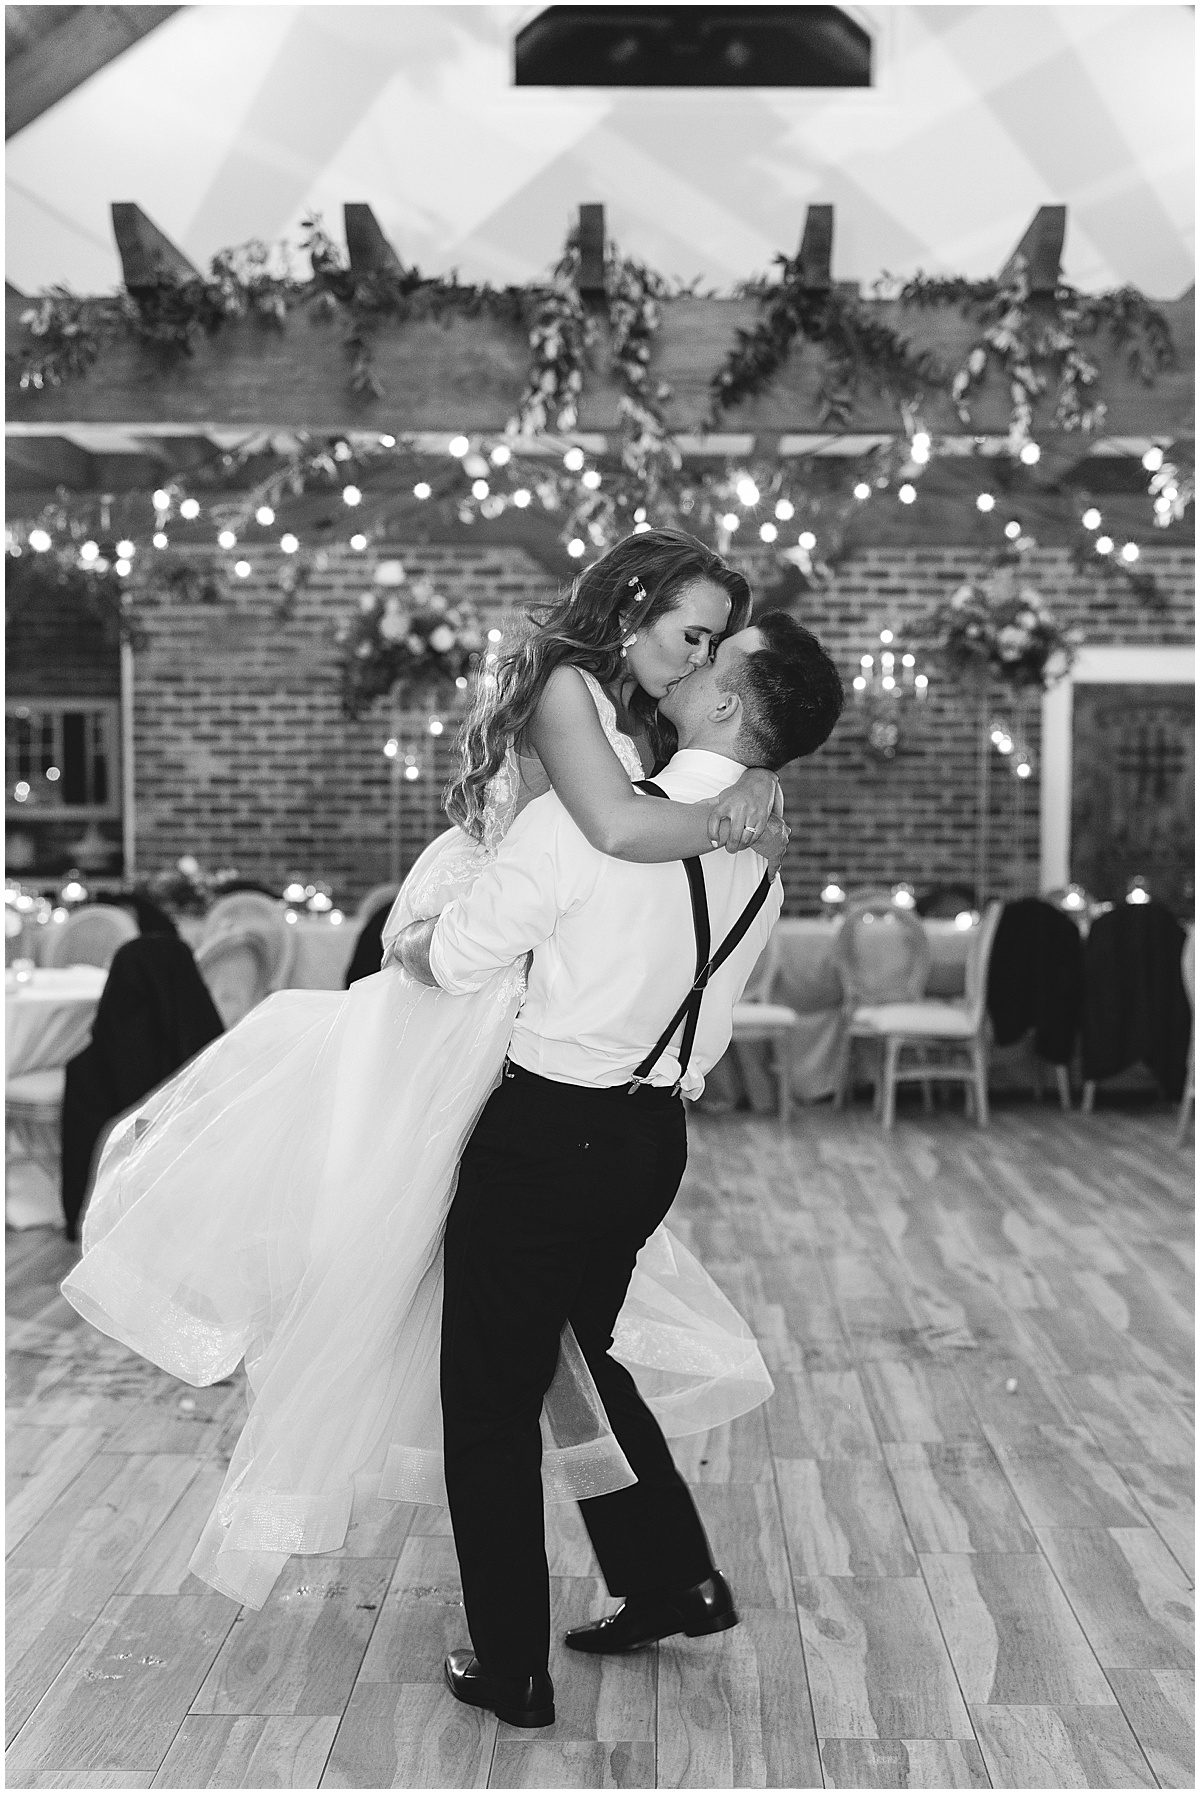 Black and White of Bride and Groom Last Dance Kissing Photo